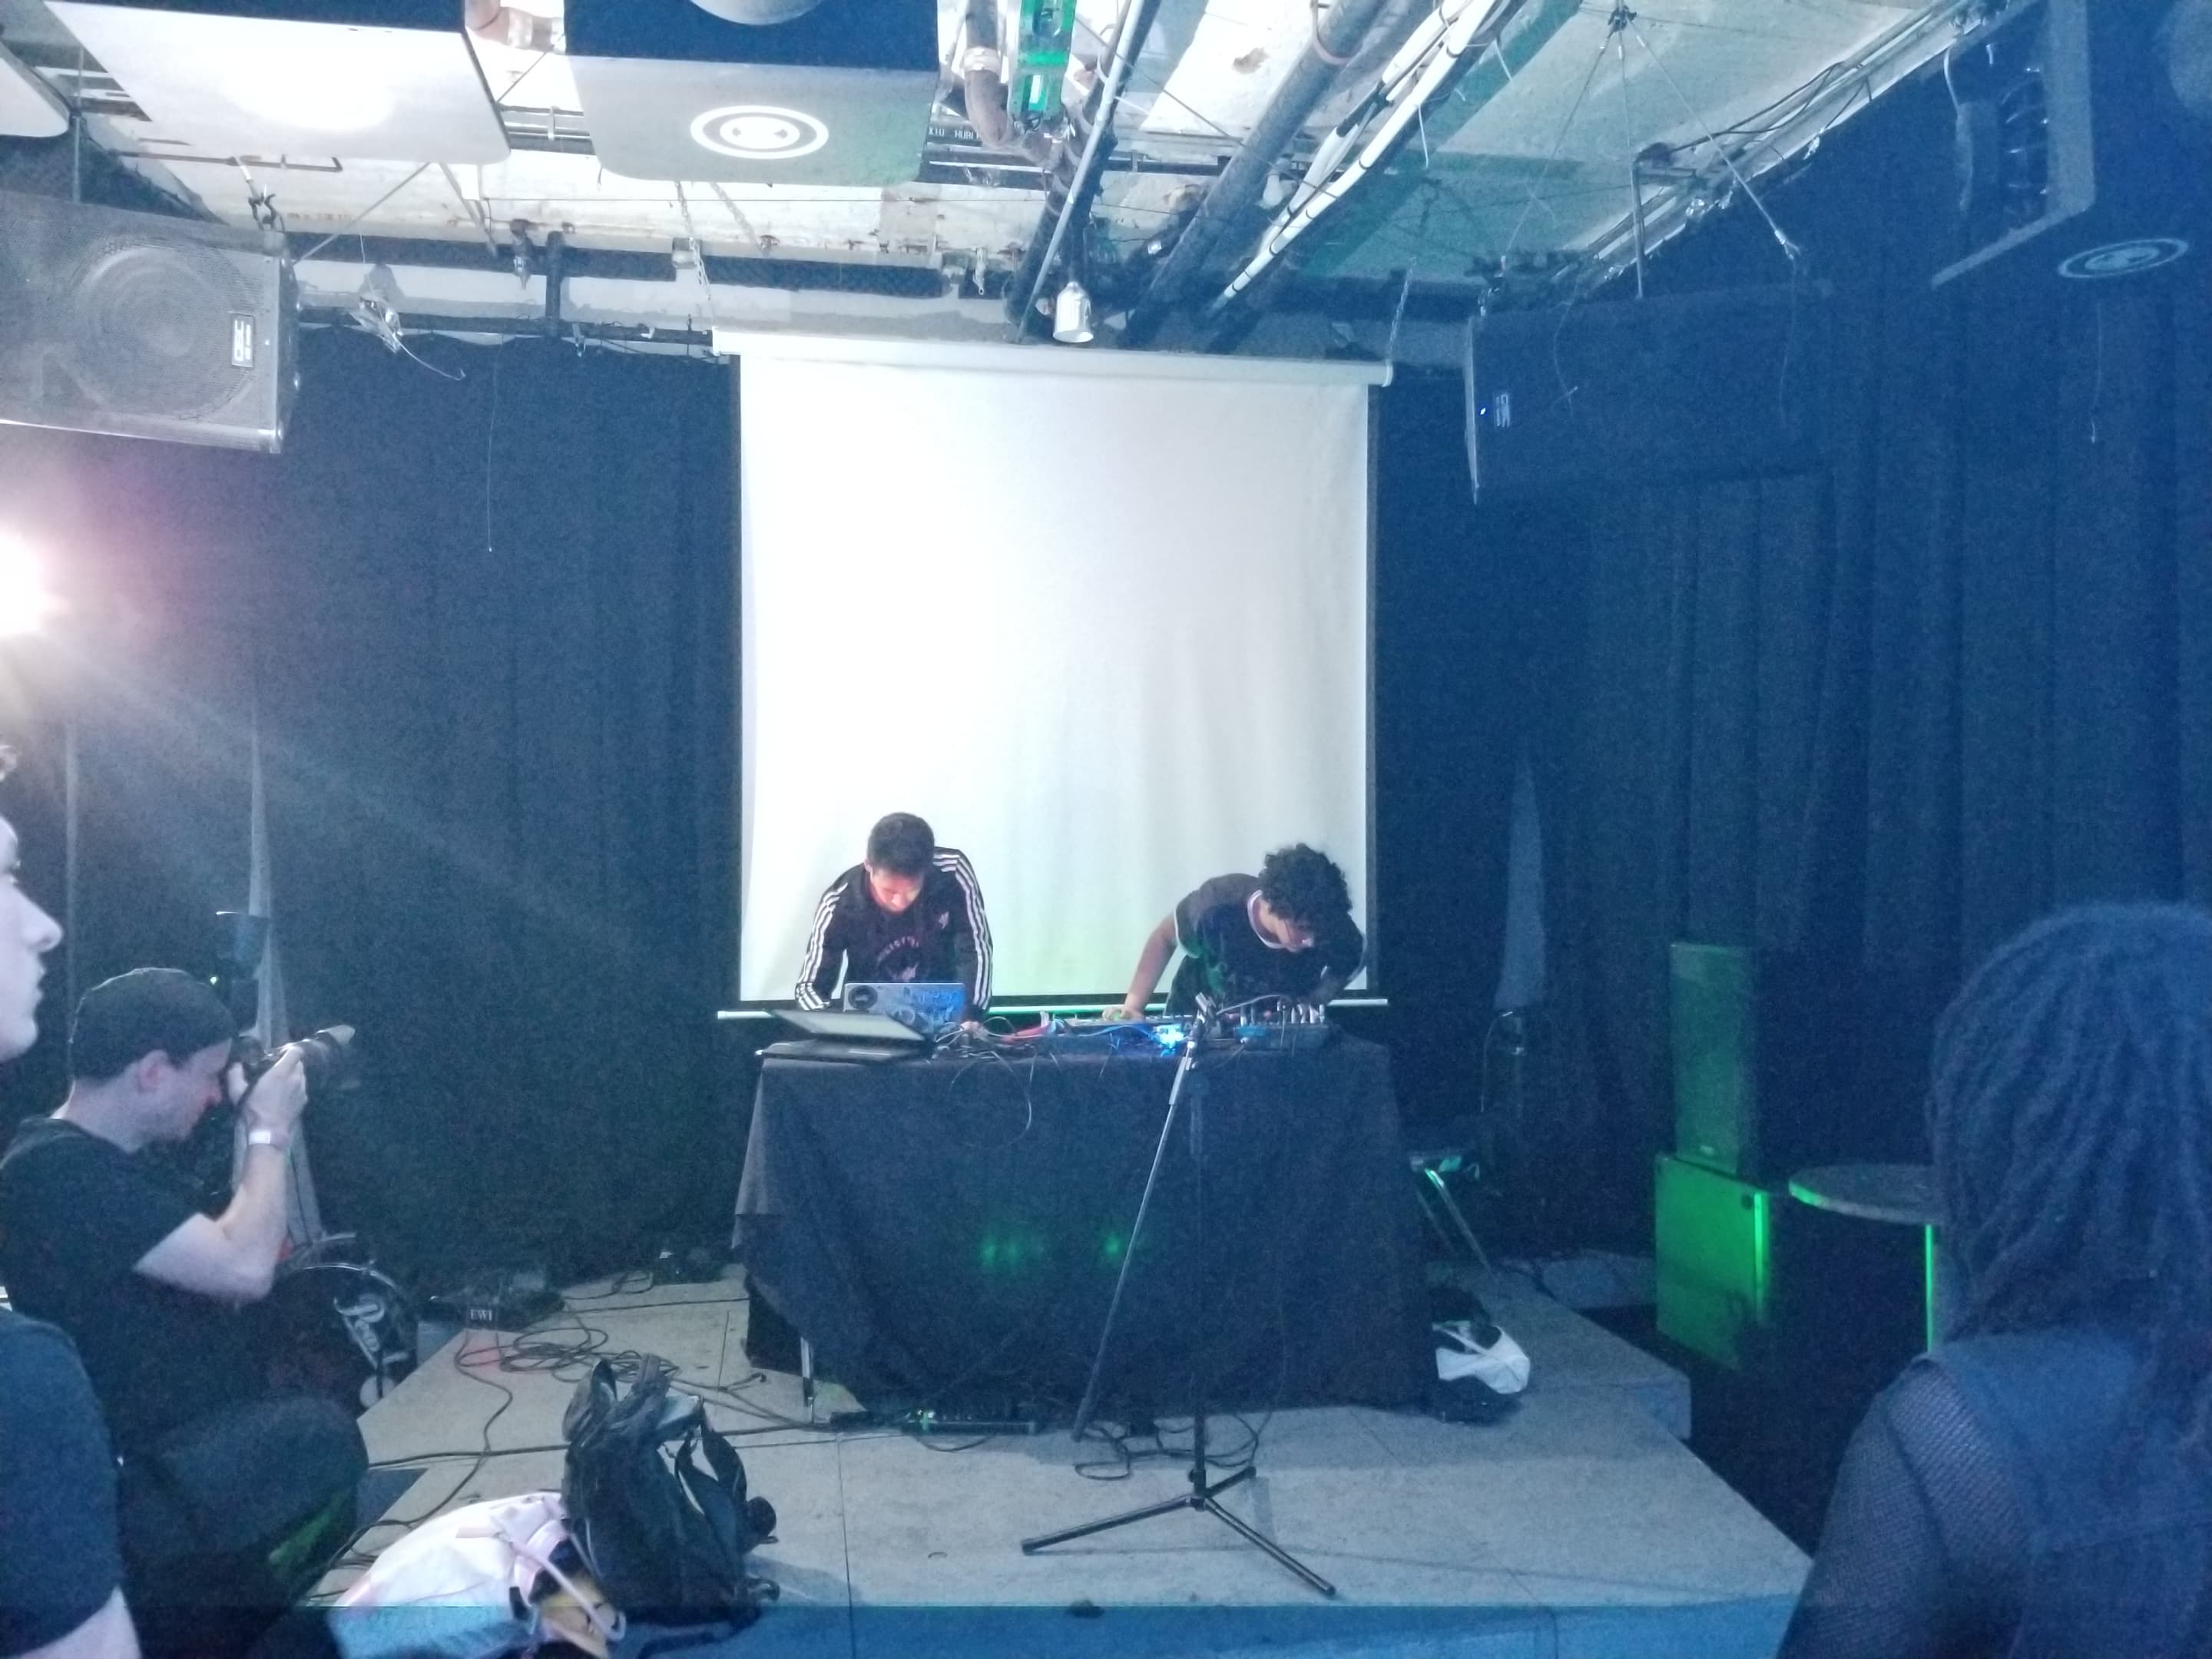 A photo of two people wearing black and white clotching at a table draped in black cloth on a stage in front of a small crowd in a medium sized performance room. On the table is a laptop and audio mixer as well as other devices and cables.